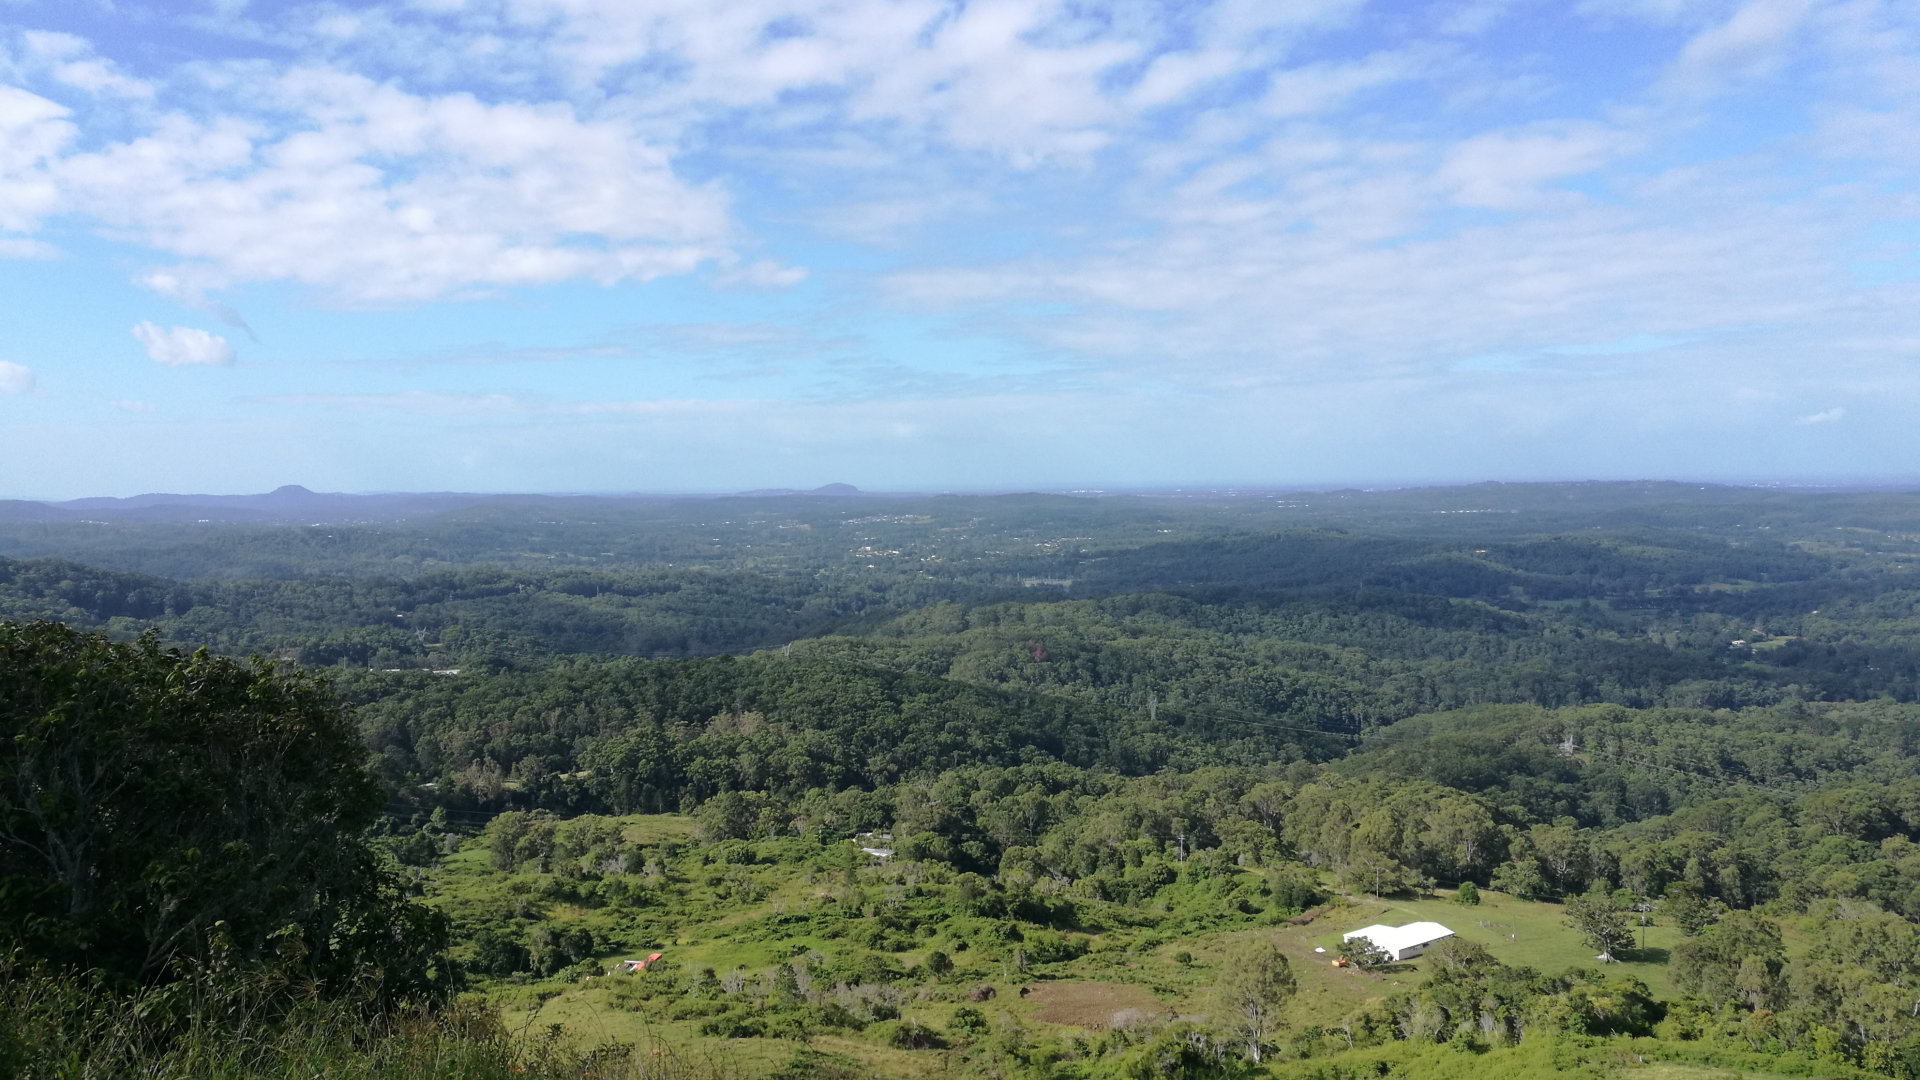 View from Gerrard's Lookout, a scenic lookout along the Maleny-Montville Rd on the Blackall Range near Montville, and looks east off the range towards the coast